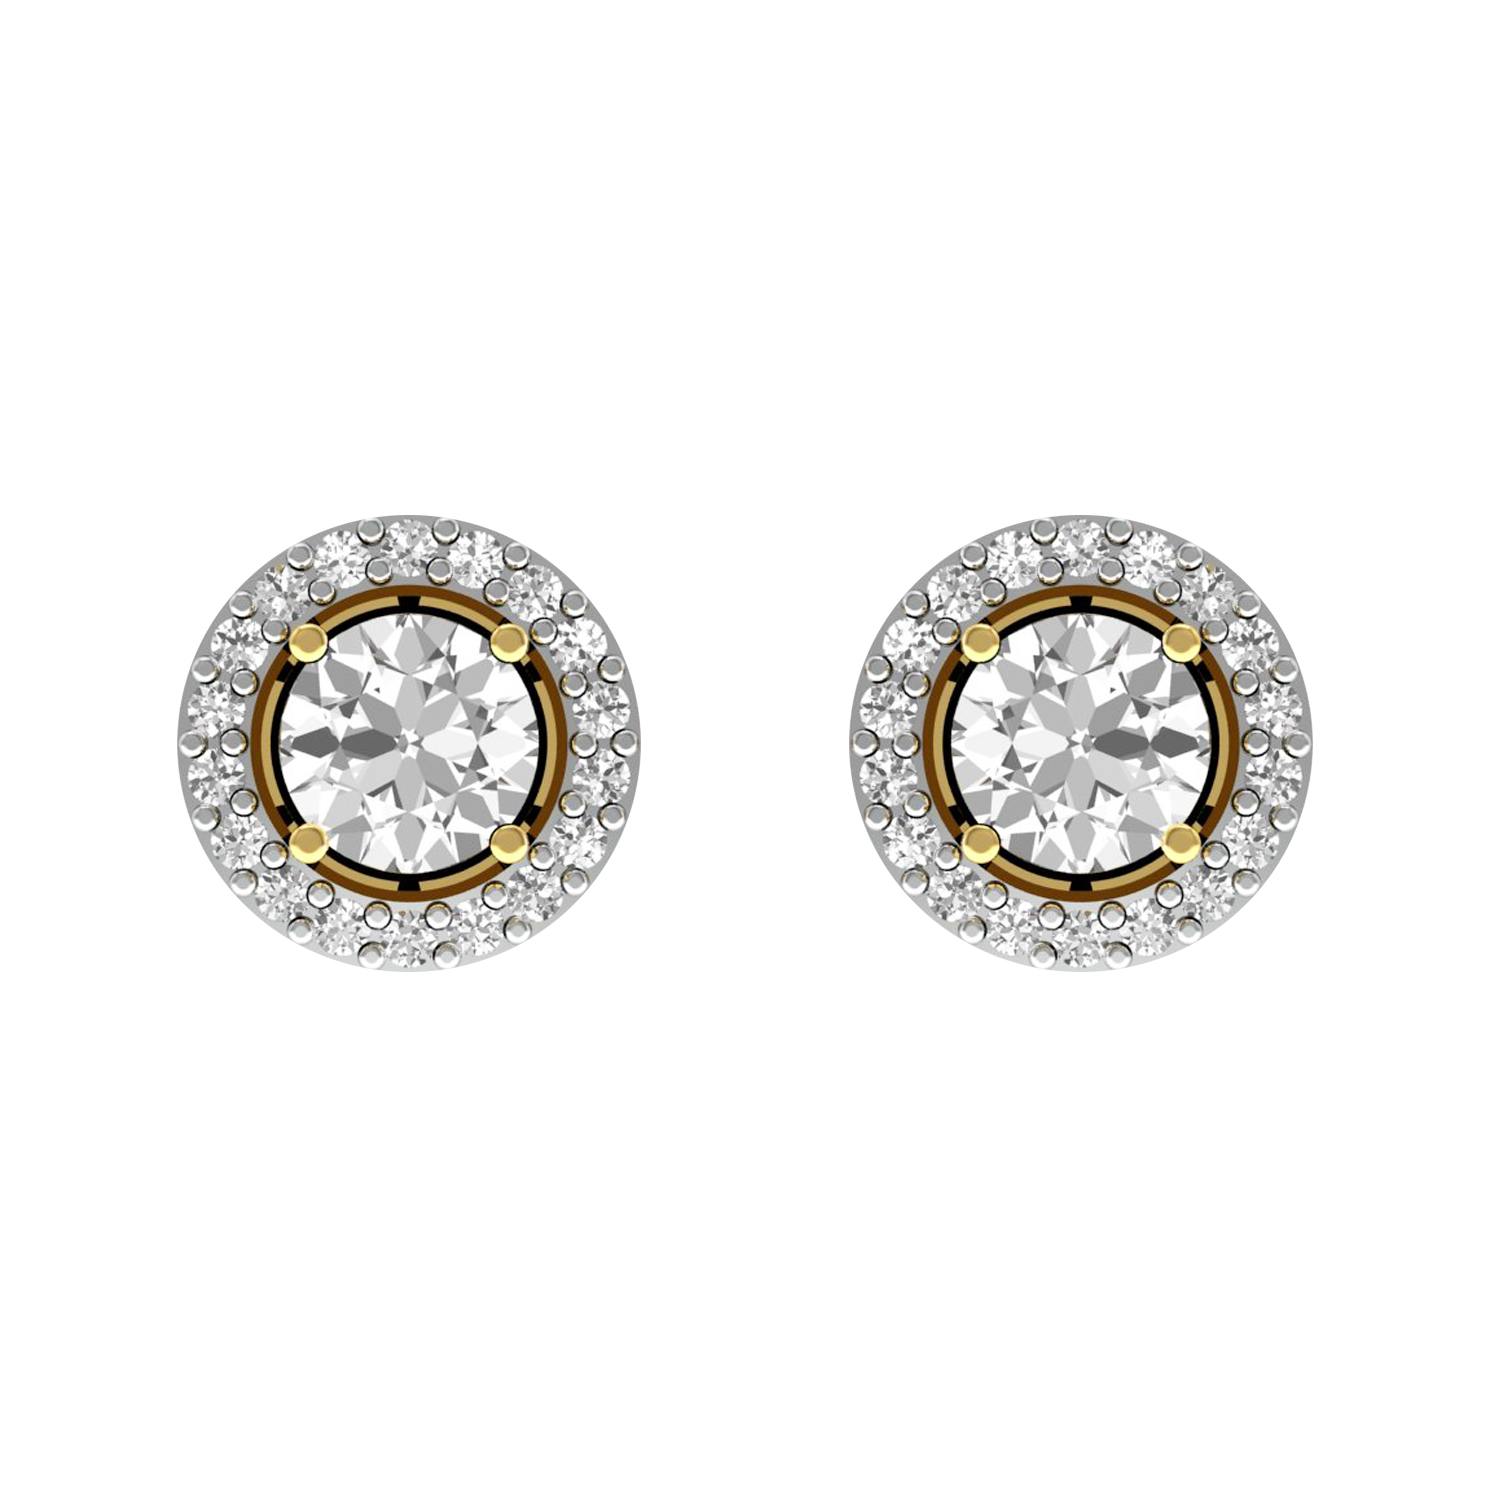 Solid Gold Genuine Diamond Solitaire Stud Earrings